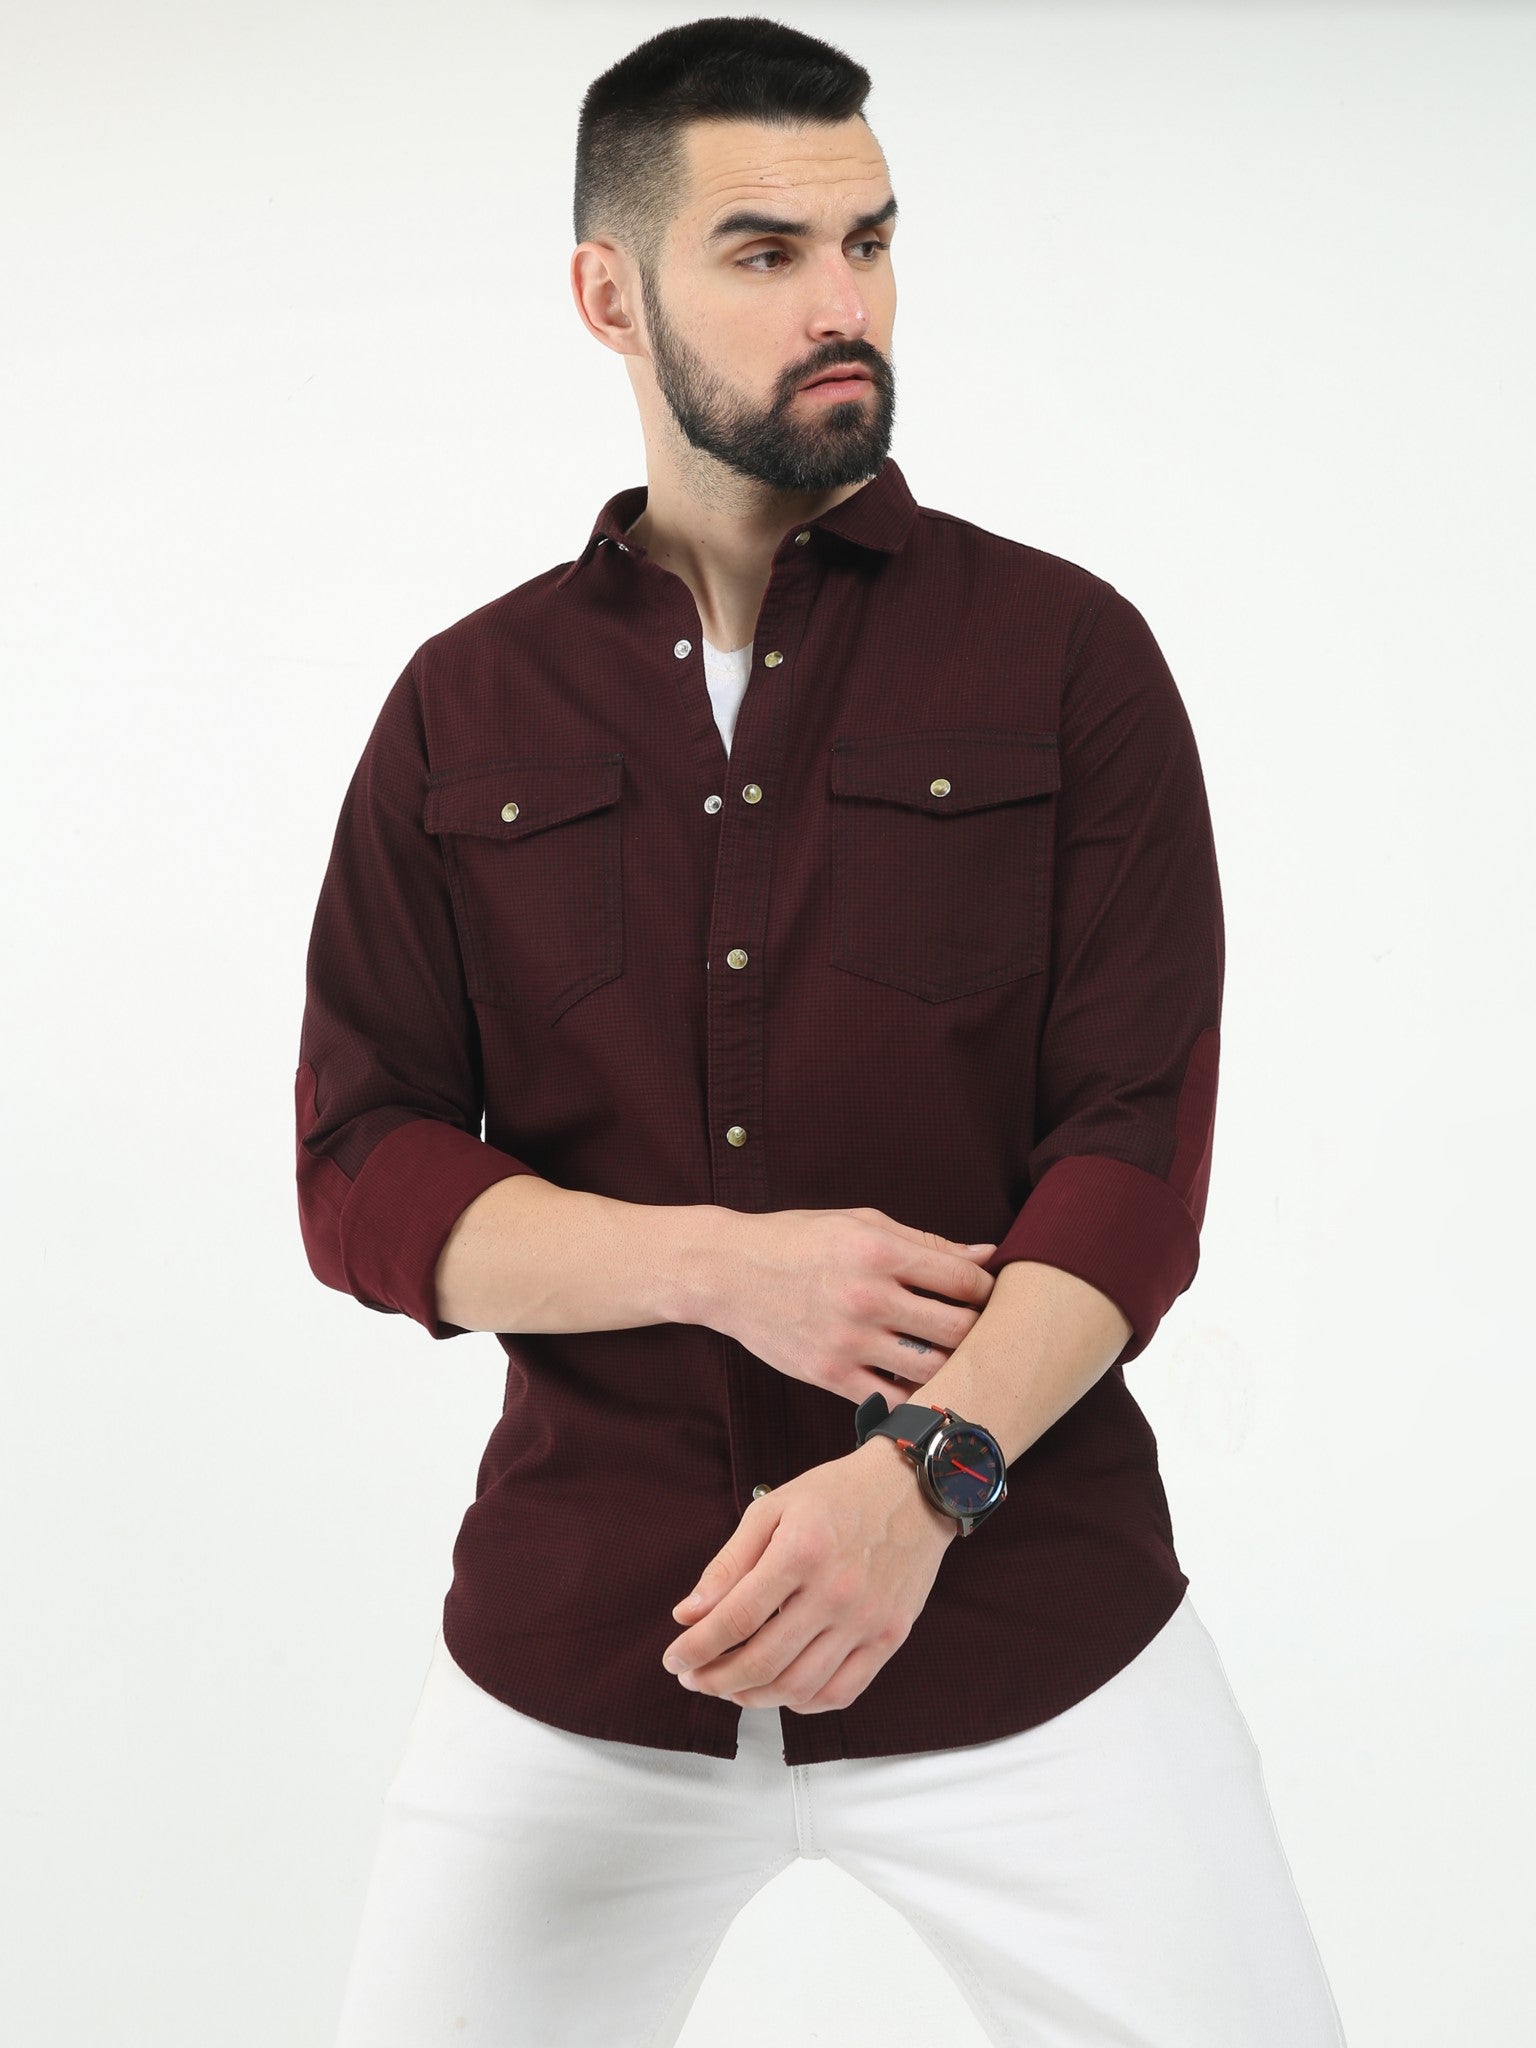 Elbow Patch Maroon Shirt for Men